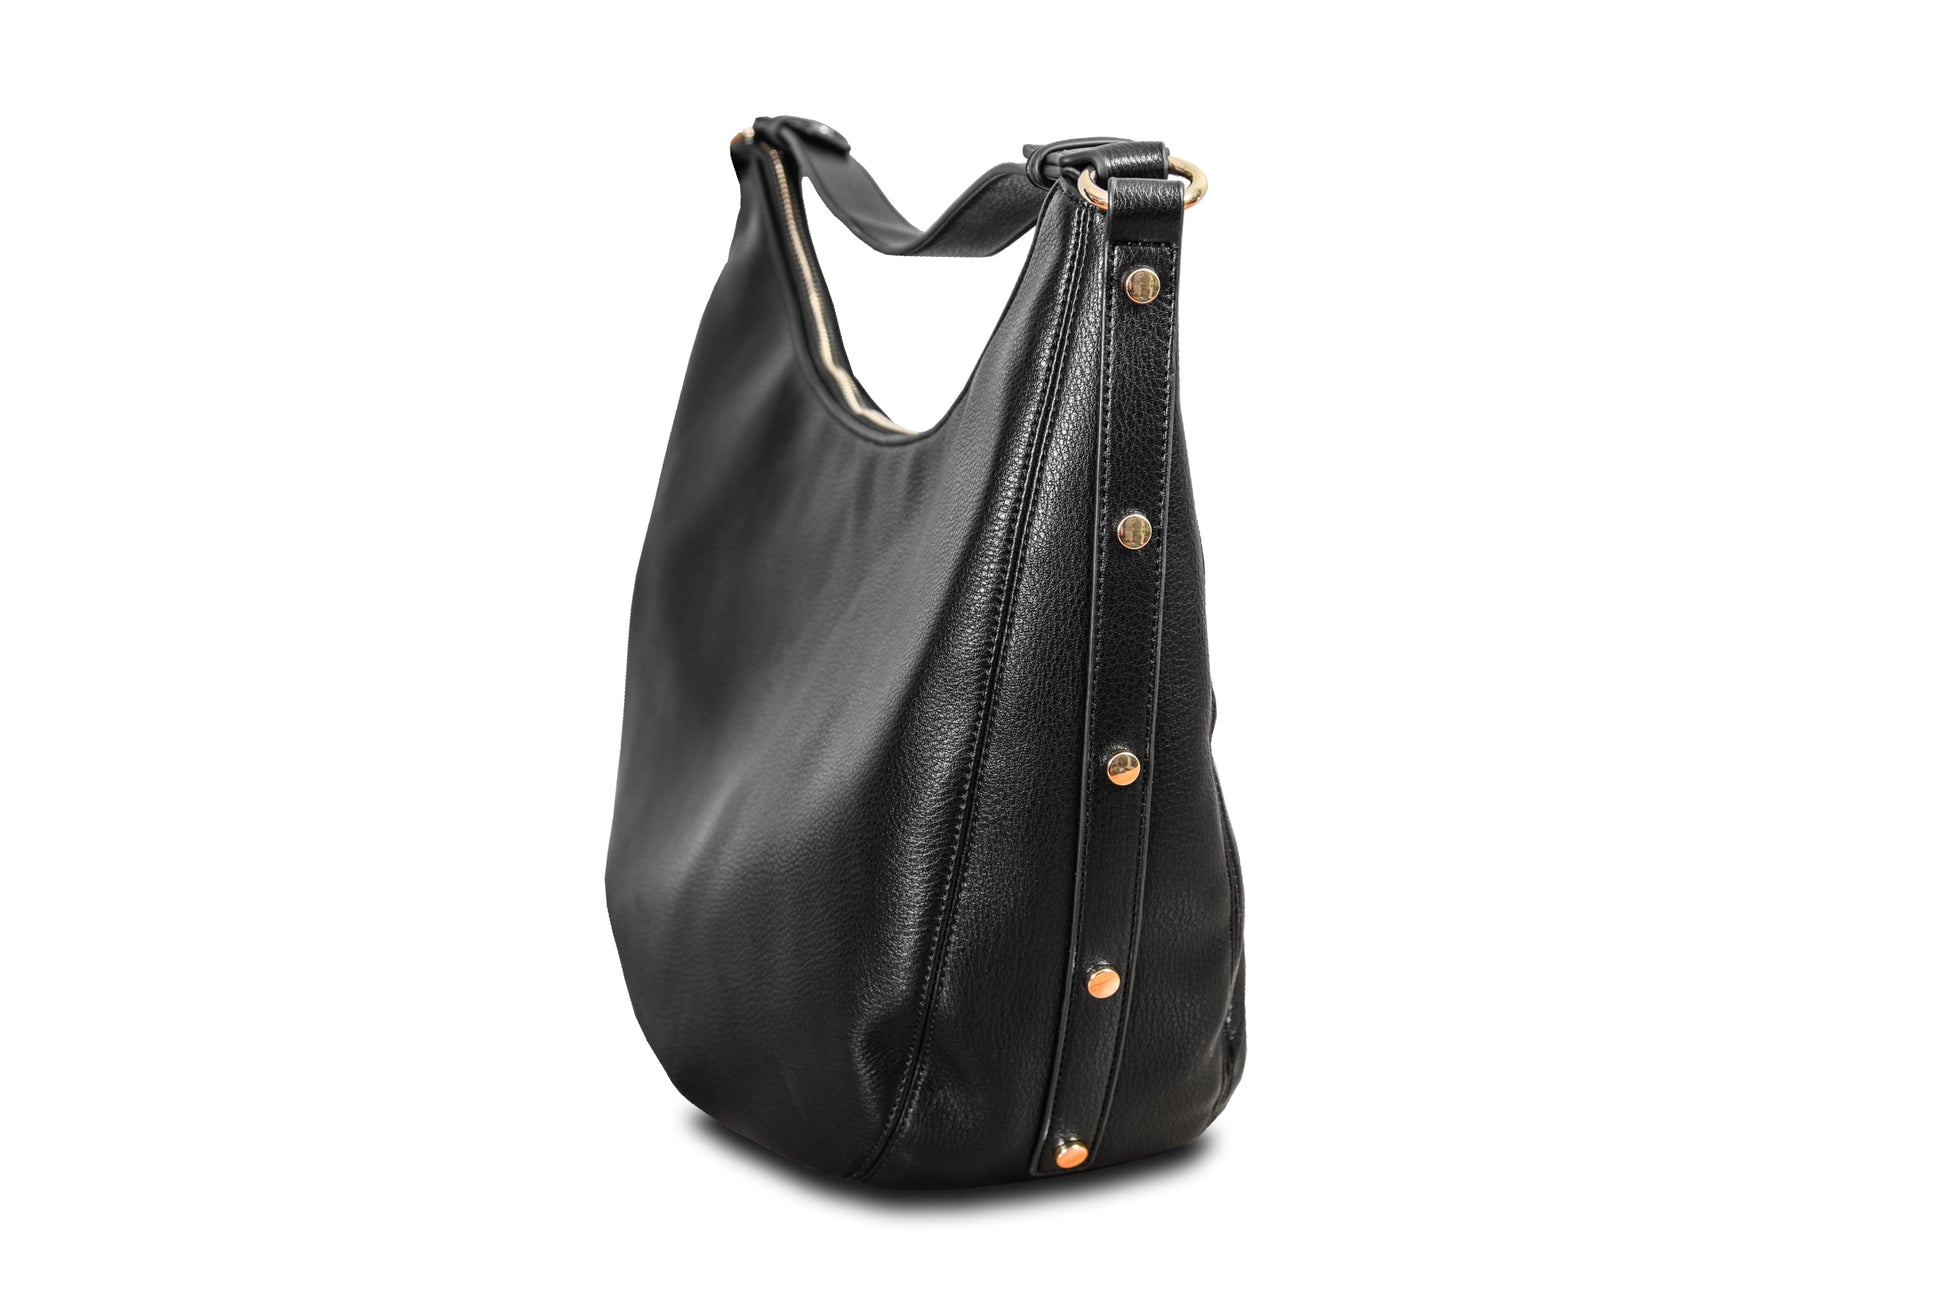 Luna Midnight Black Crescent Pebble Grain Faux Leather Handbag made by Dewi Maya side view available at the best boutique in Upstate South Carolina Spartanburg Greenville Dewi Maya Boutique